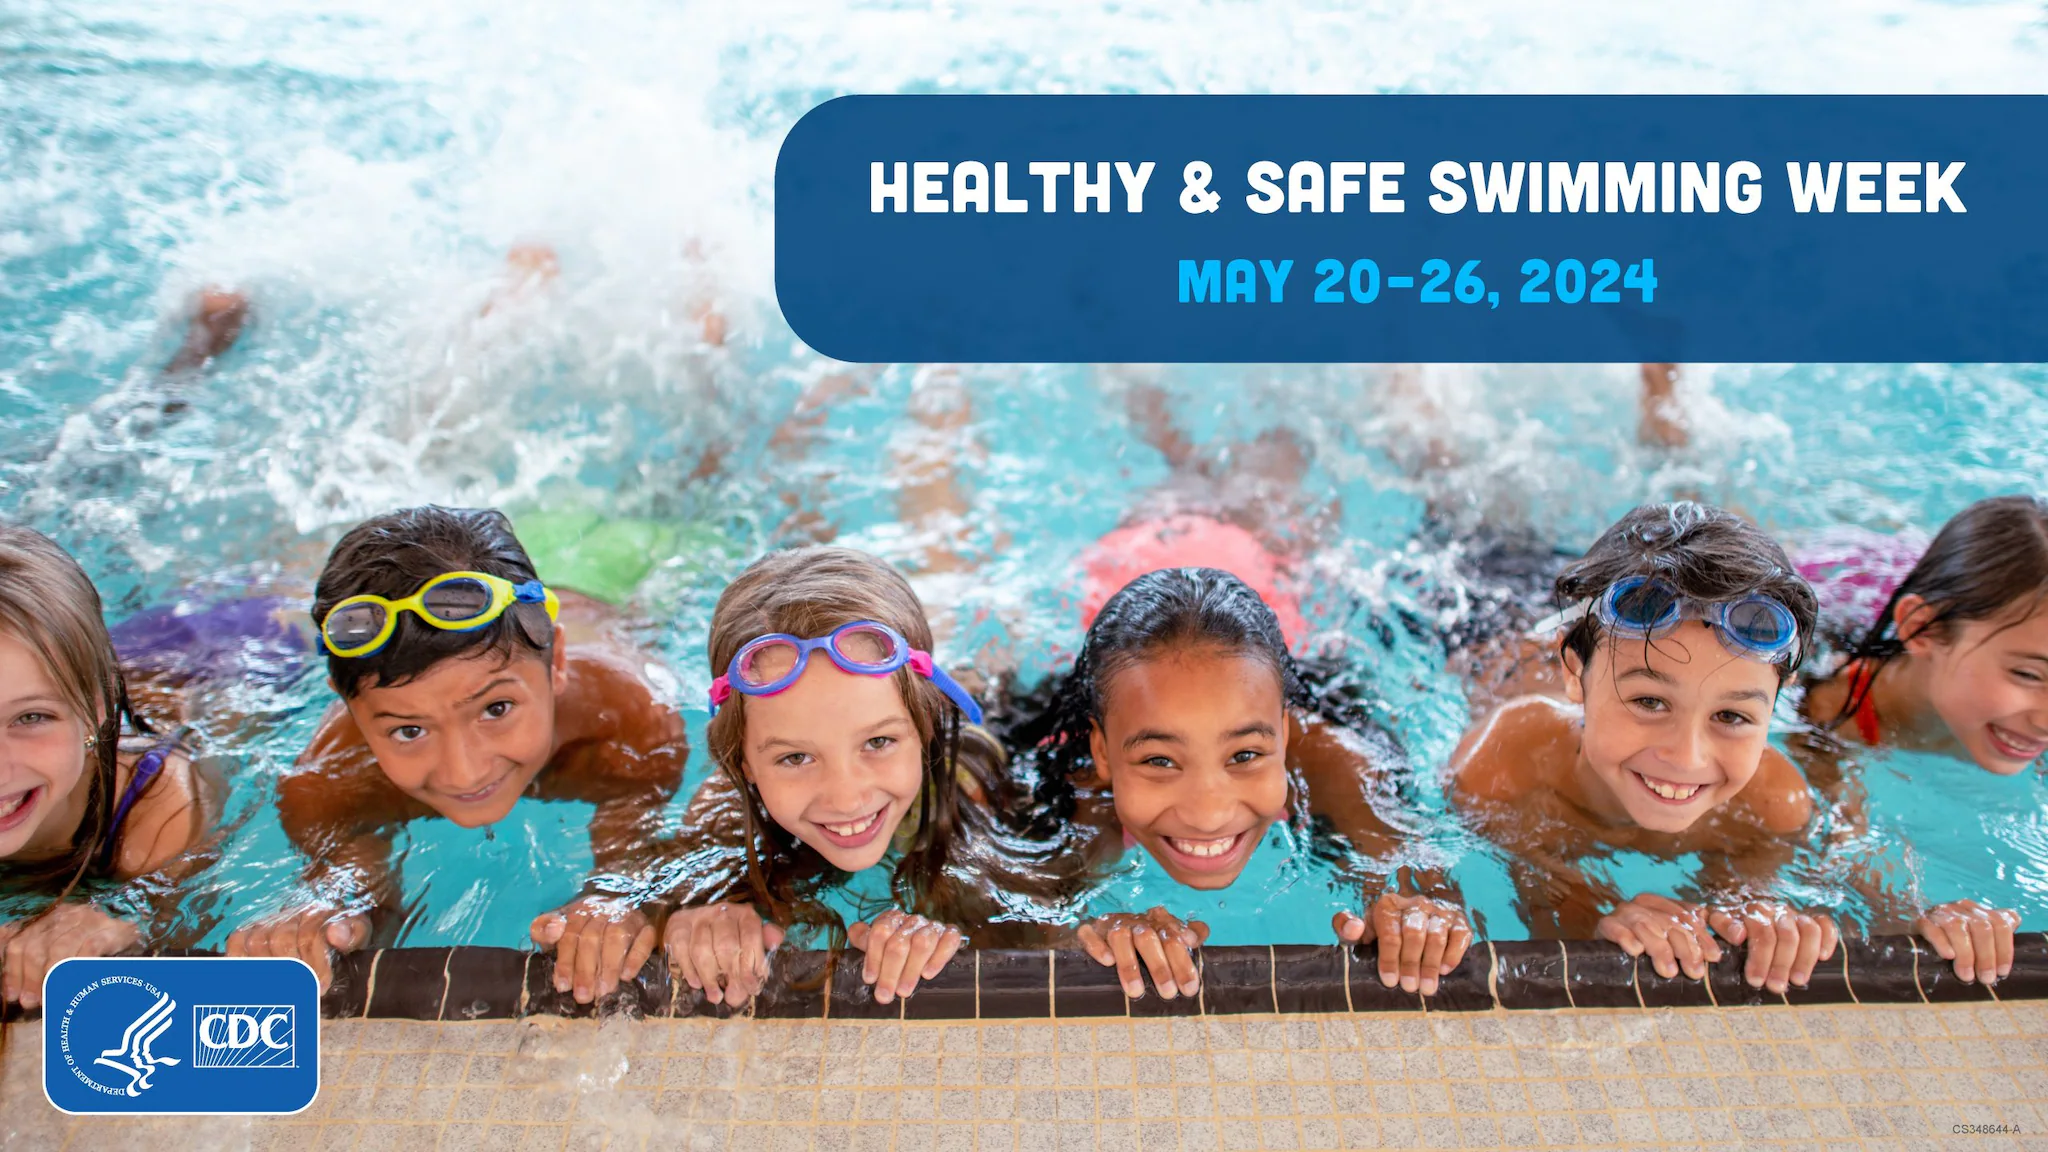 A diverse group of smiling children hang on to the side of a pool while kicking water. Text: Healthy and Safe Swimming Week May 20-26, 2024. CDC and HHS logos. 